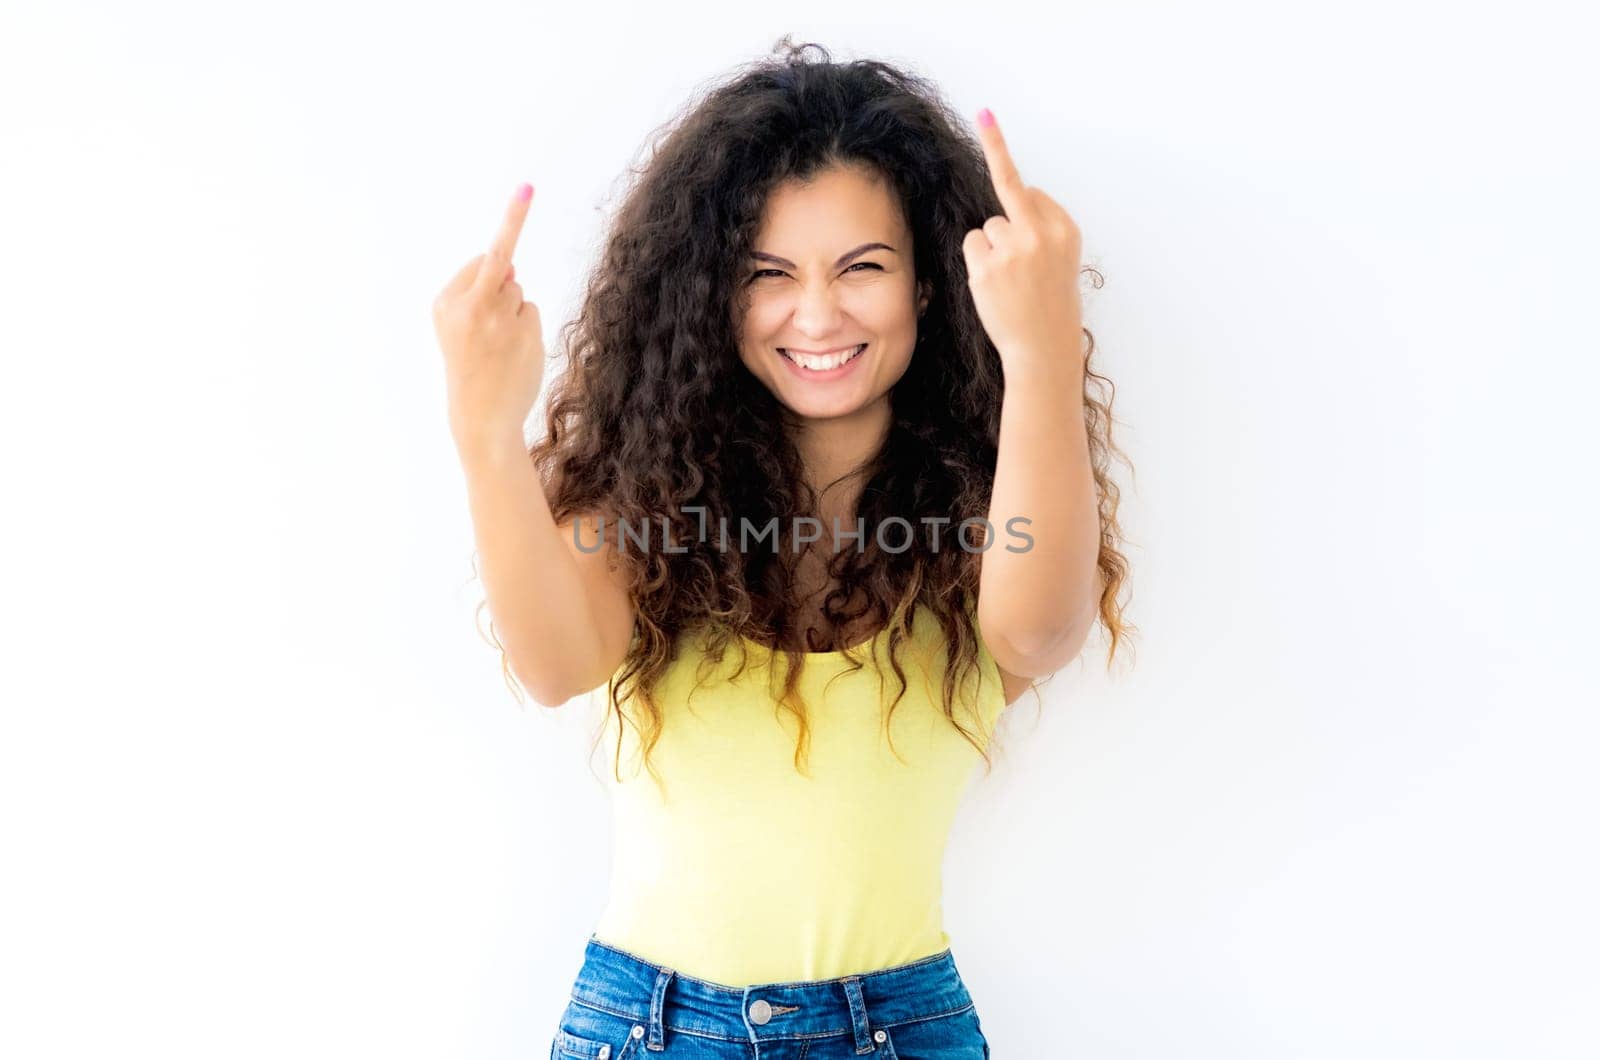 Gorgeous young girl showing middle fingers